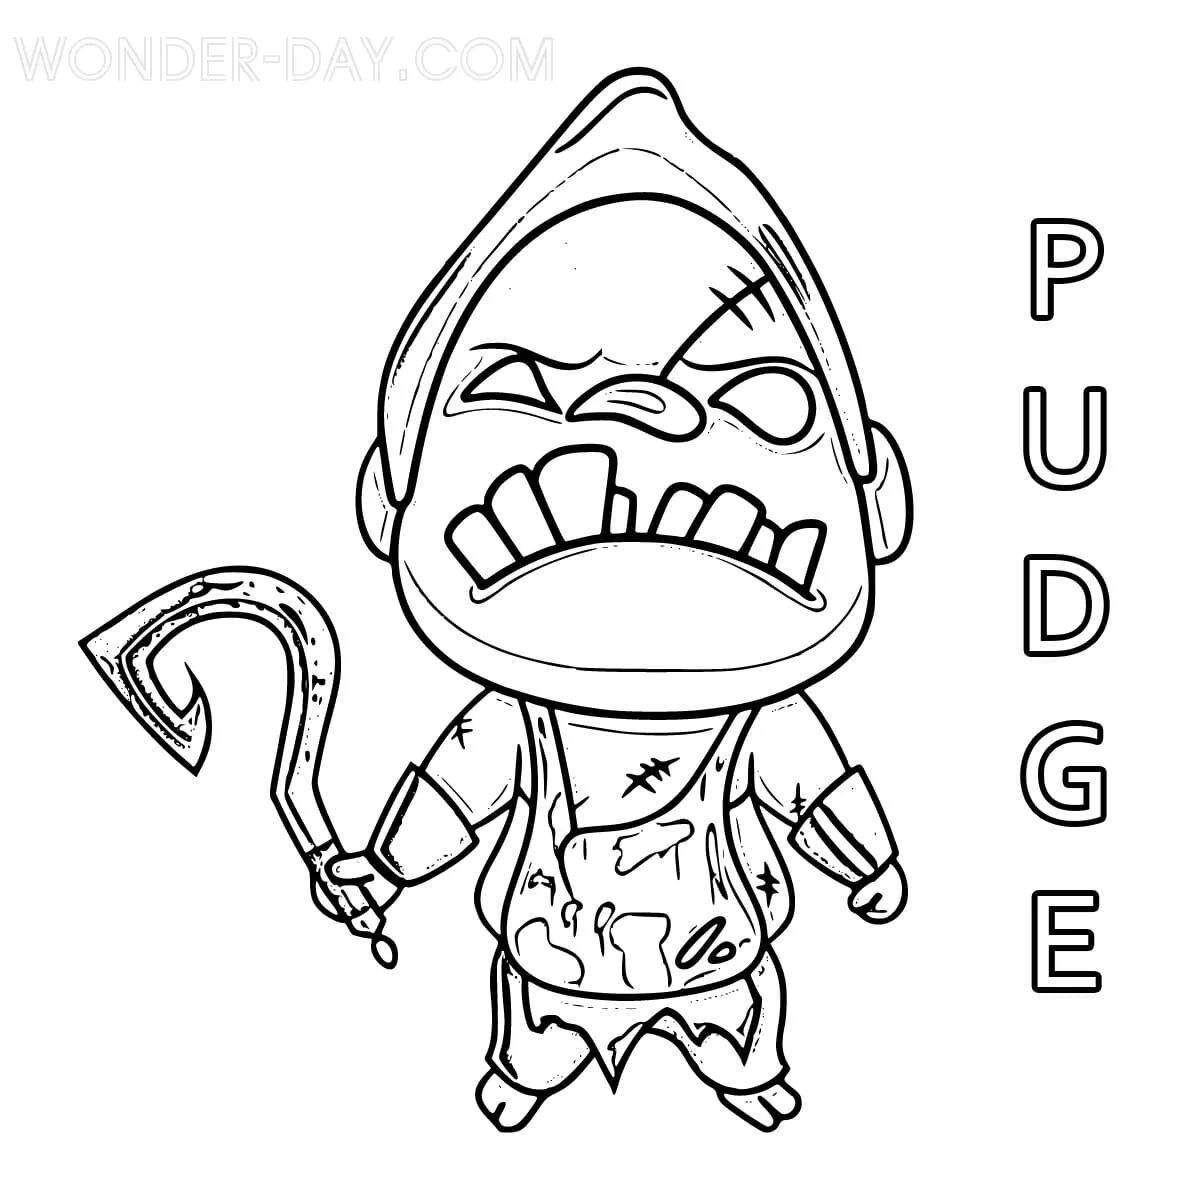 Attractive pudge coloring page